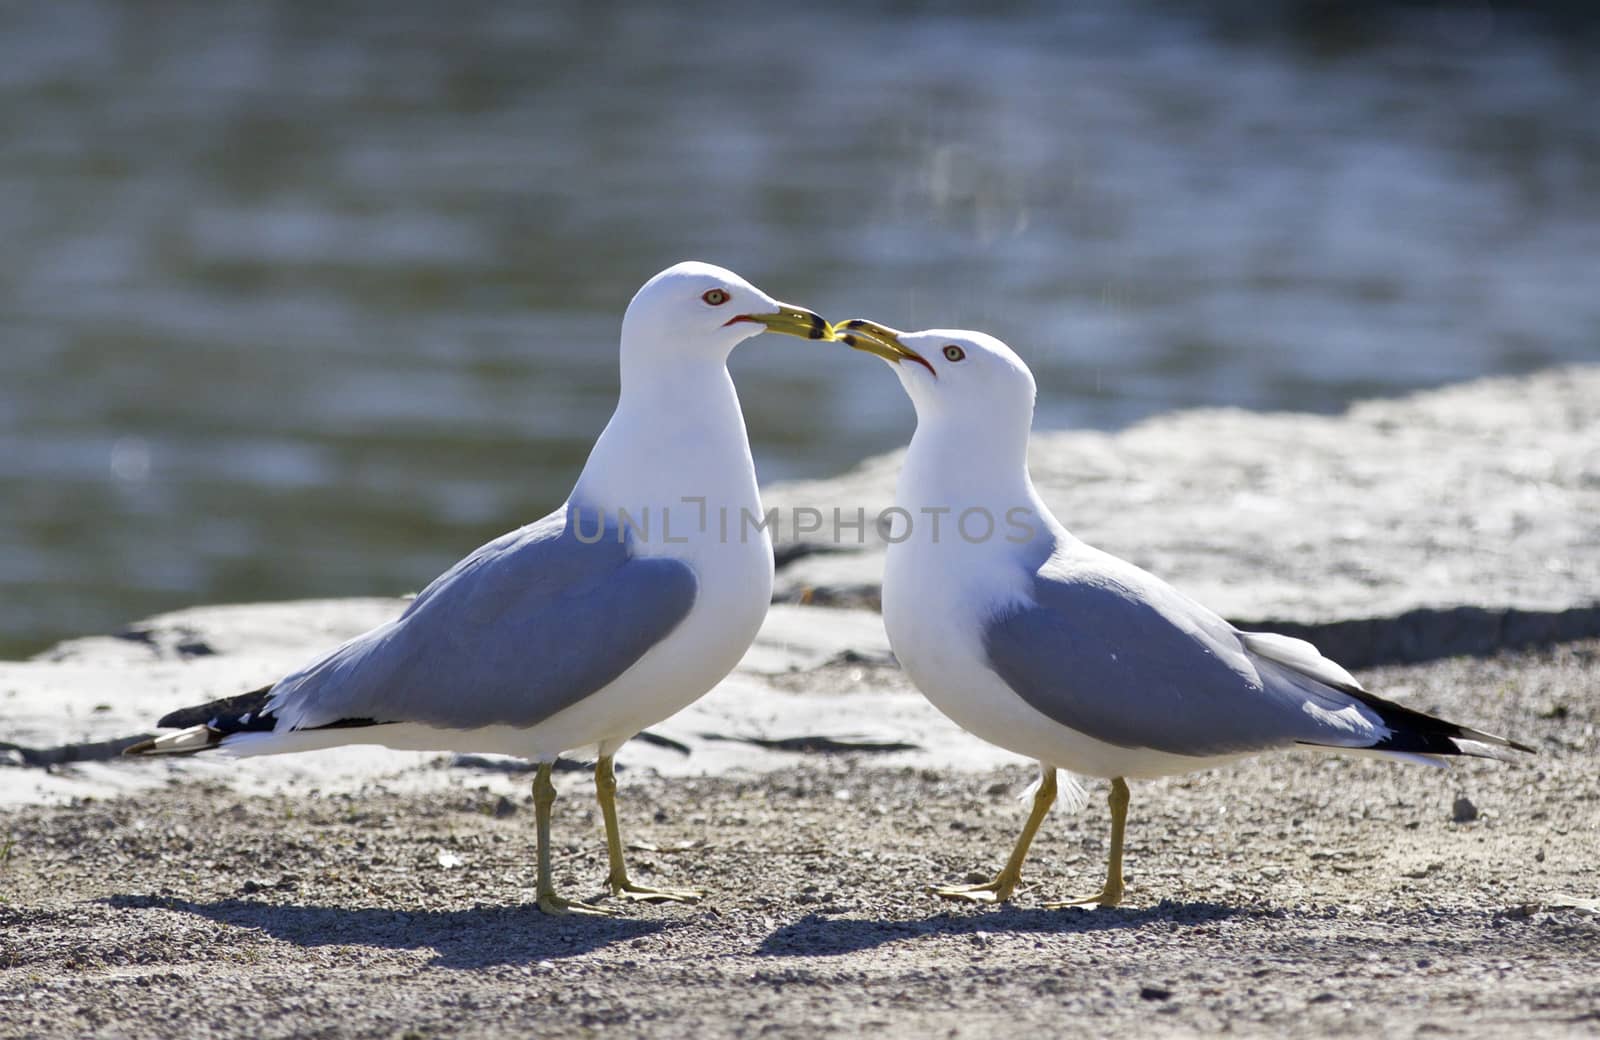 Beautiful photo of two kissing gulls in love